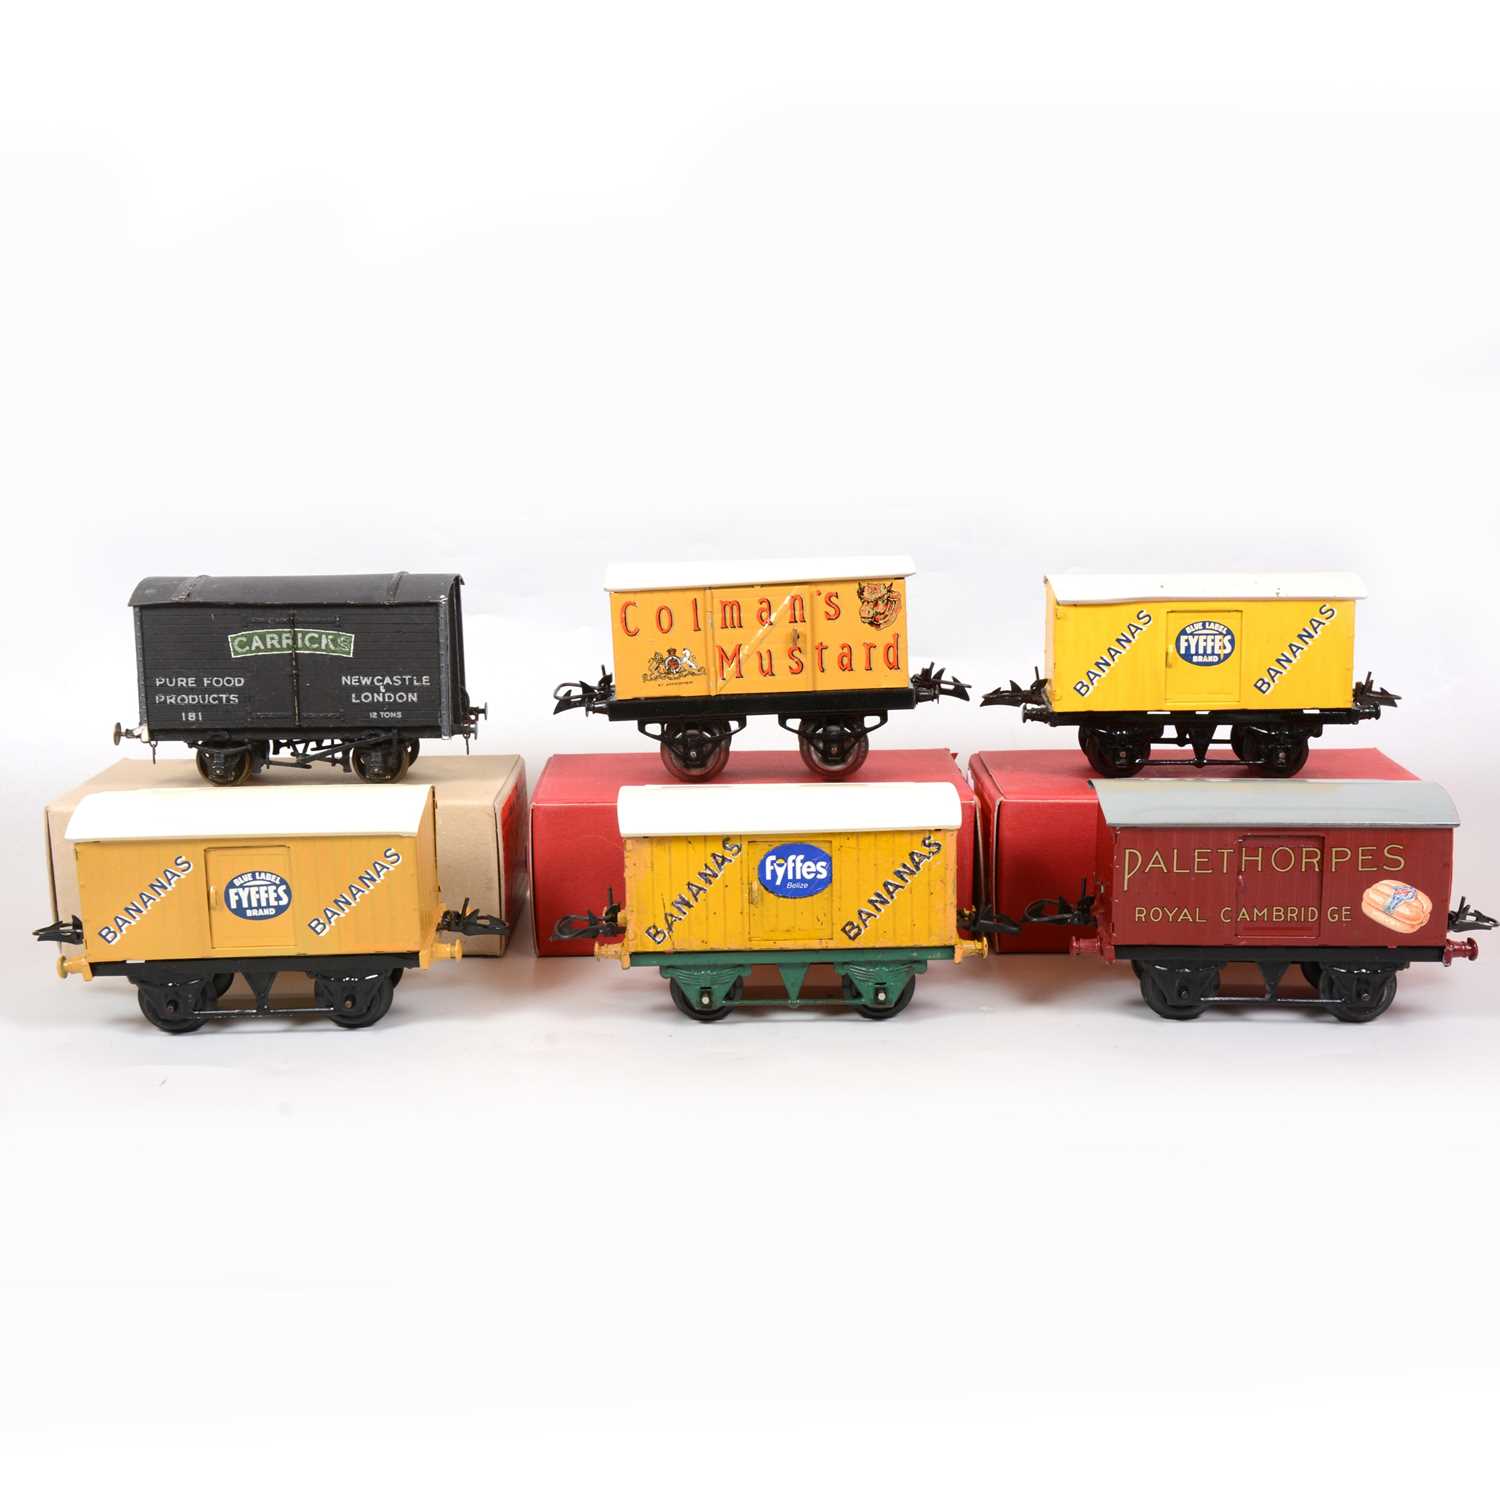 Lot 44 - Six Hornby and kit-built O gauge model railway vans with advertising